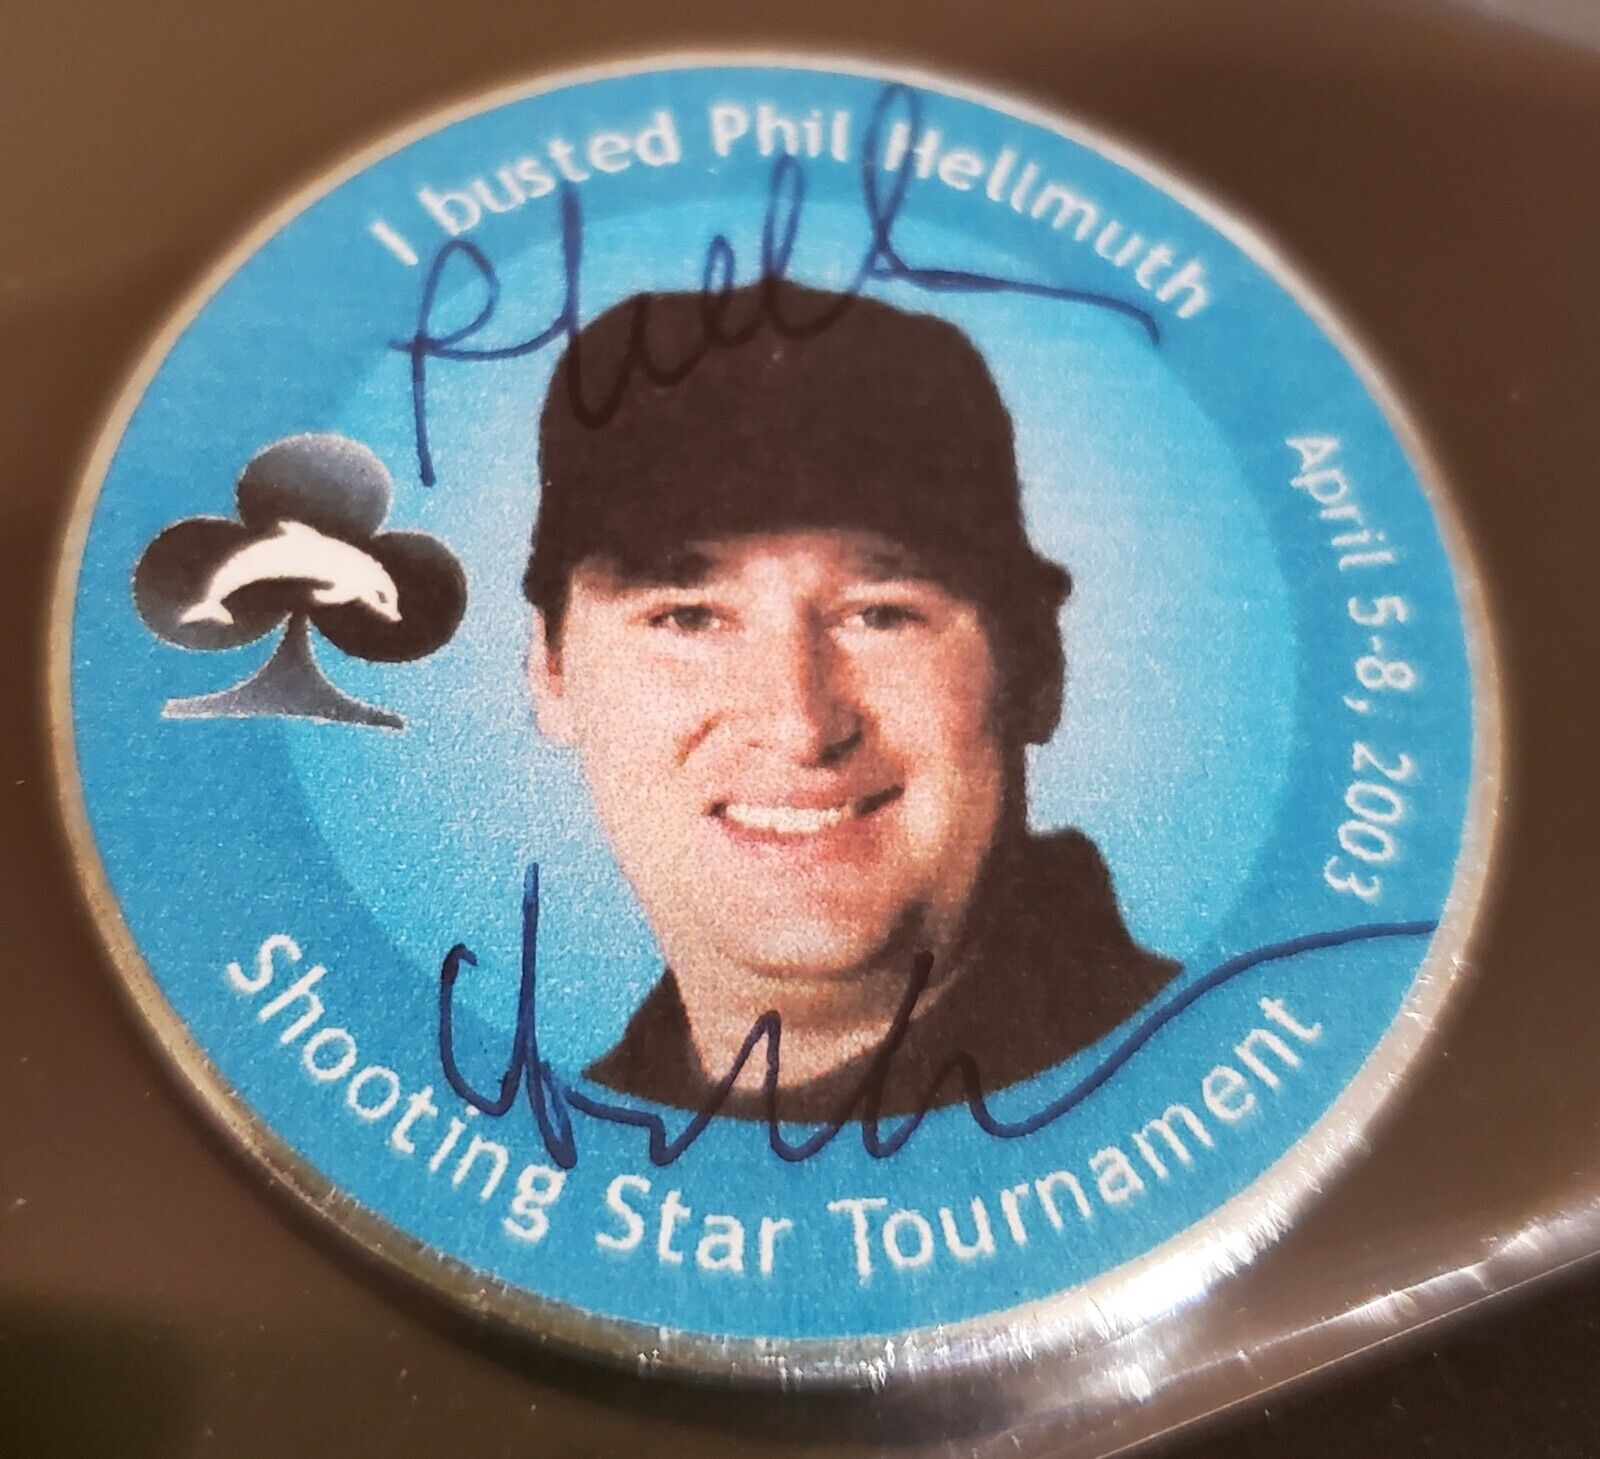 Phil Helmuth Poker Brat Signed Autograph Chip Coin Poker Tournament 2003 Texas